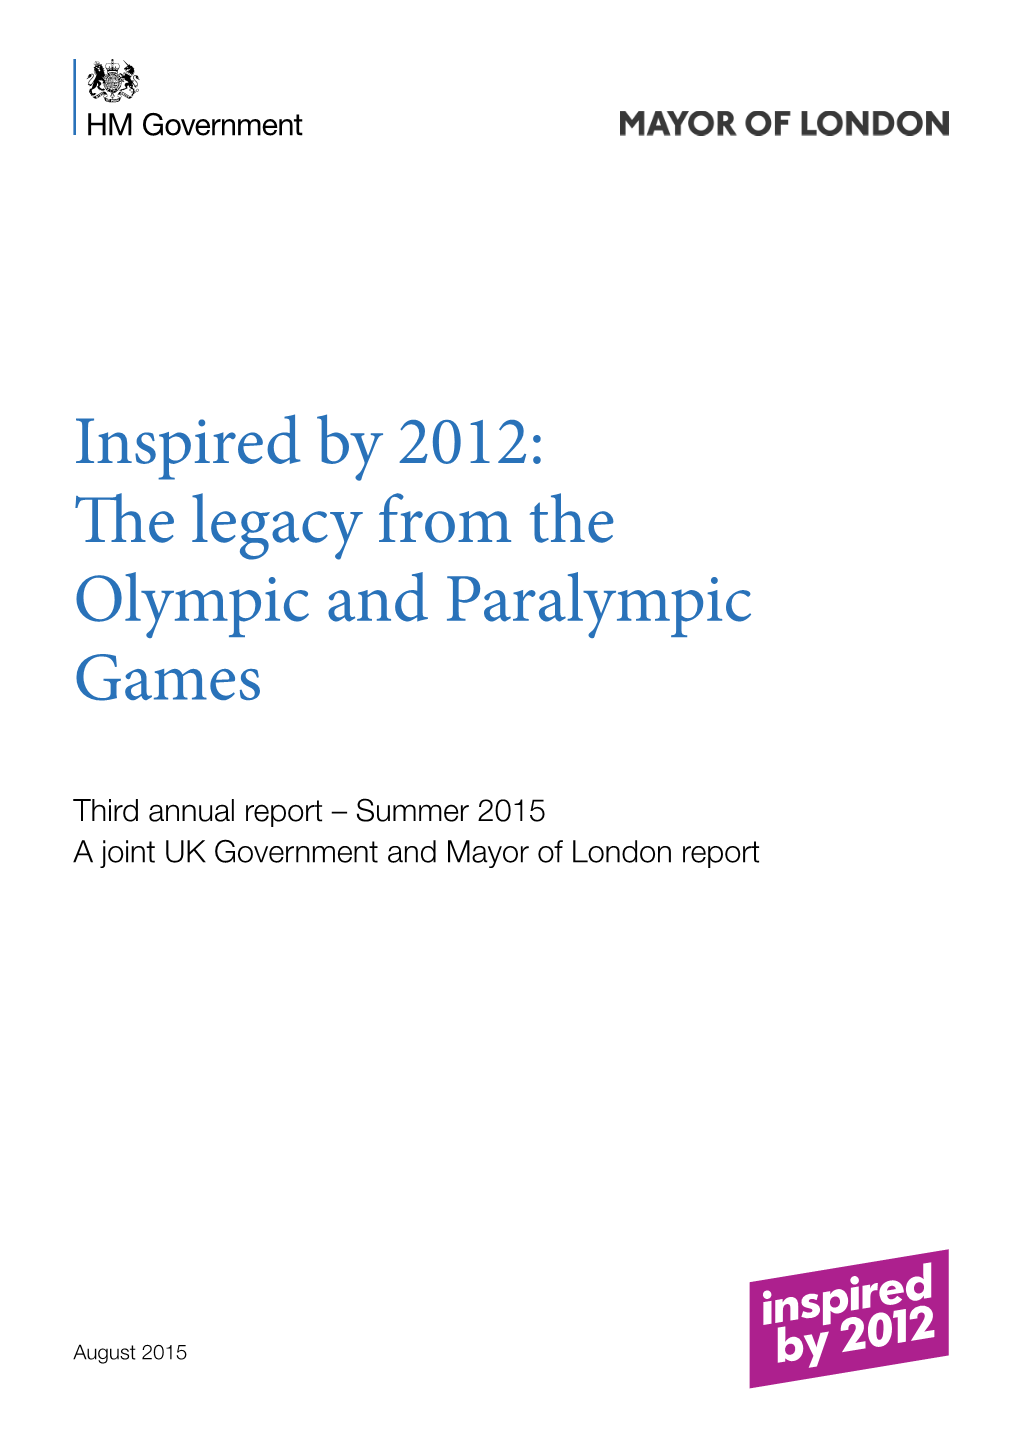 Inspired by 2012: the Legacy from the Olympic and Paralympic Games